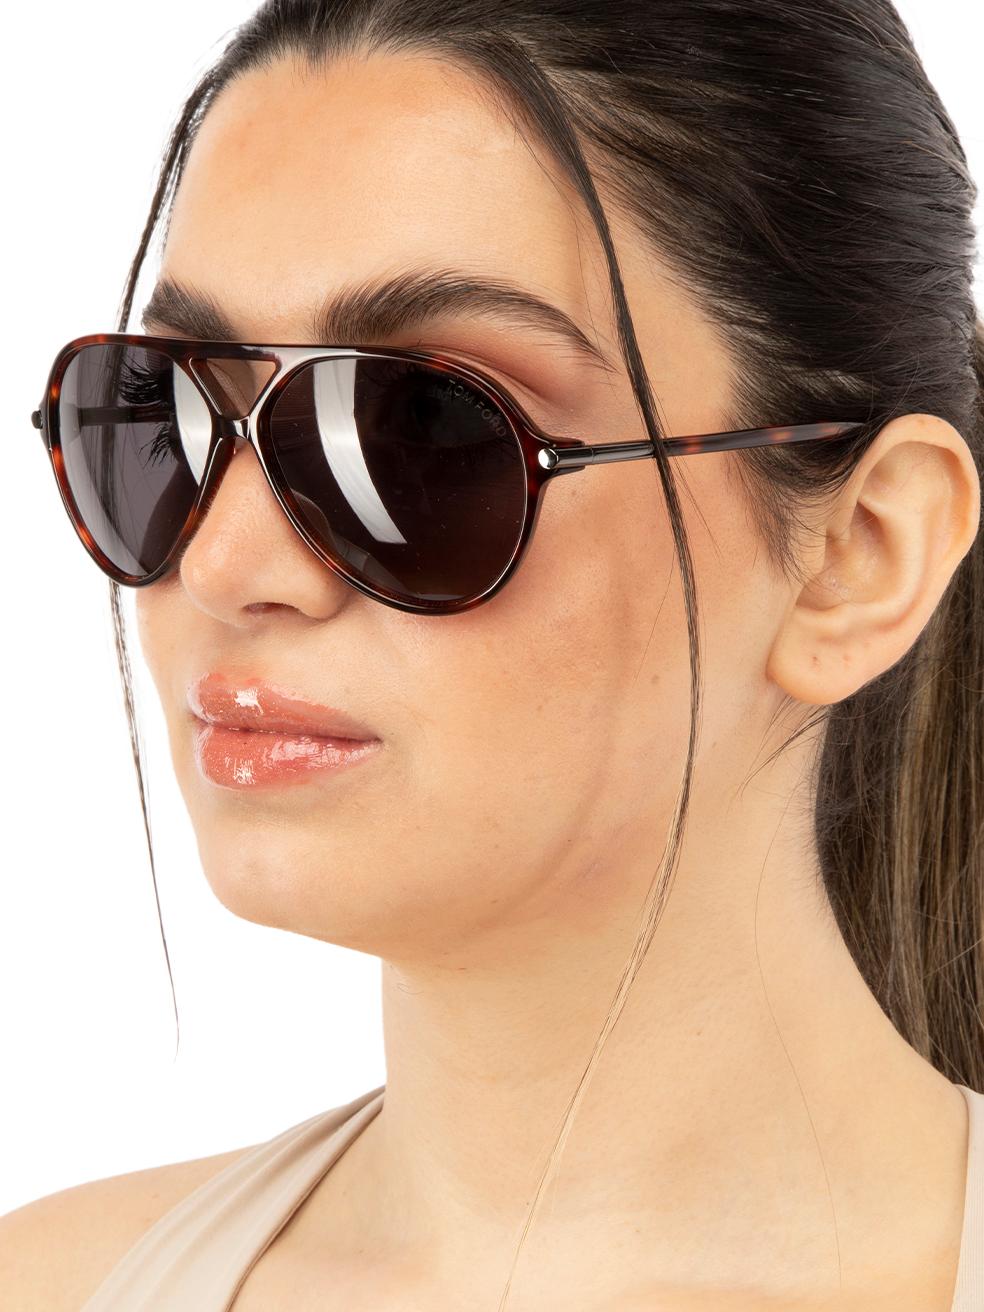 CONDITION is New with tags on this brand new Tom Ford designer item. This item comes with original packaging.
 
 
 
 Details
 
 
 Model: FT0197
 
 Red Havana
 
 Acetate
 
 Aviator Sunglasses
 
 
 Graduated Grey Lens
 
 
 Full-Rim
 
 Tortoiseshell